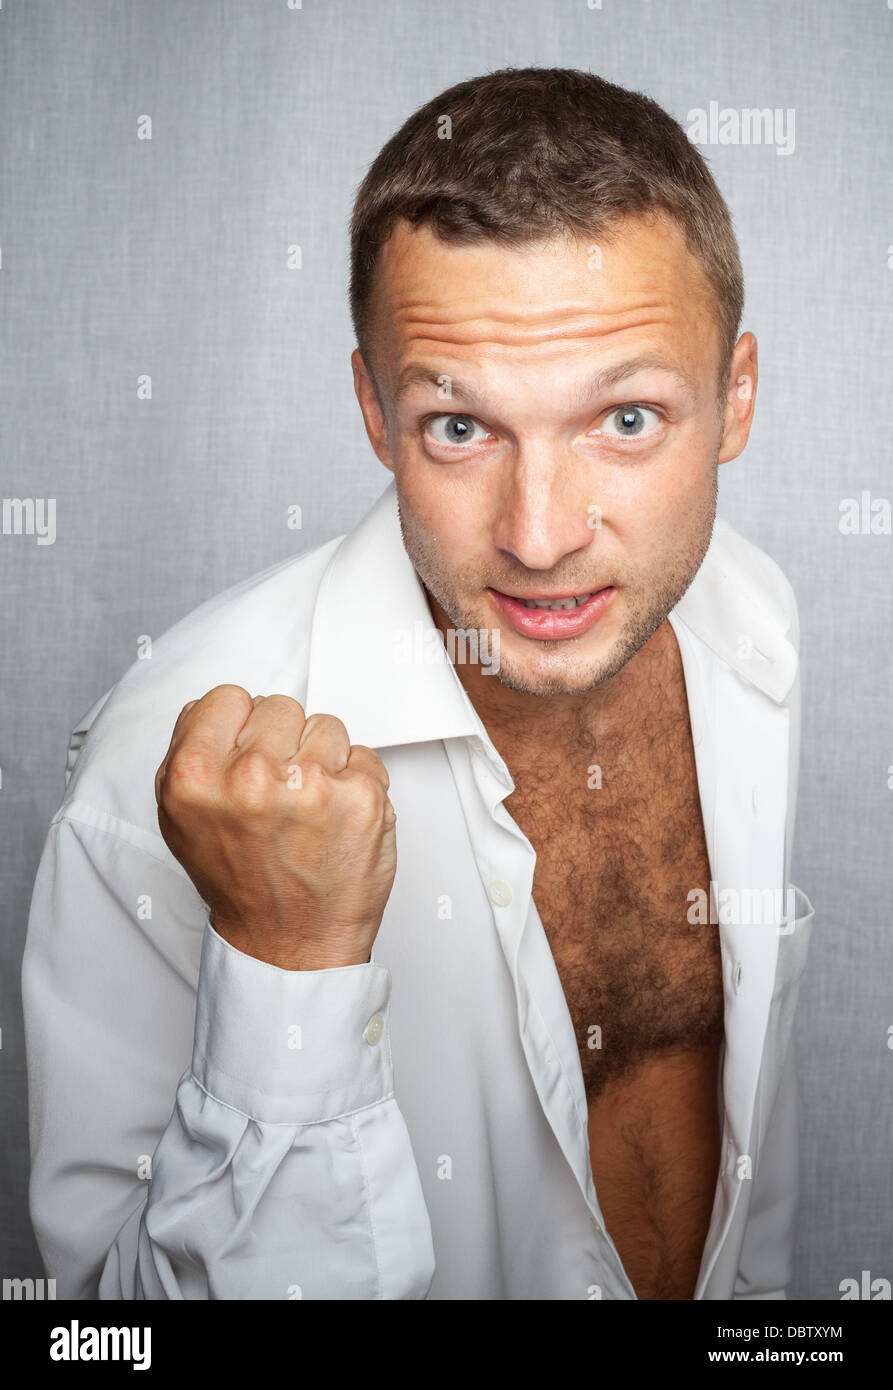 Young Caucasian man in white shirt showing fist Stock Photo